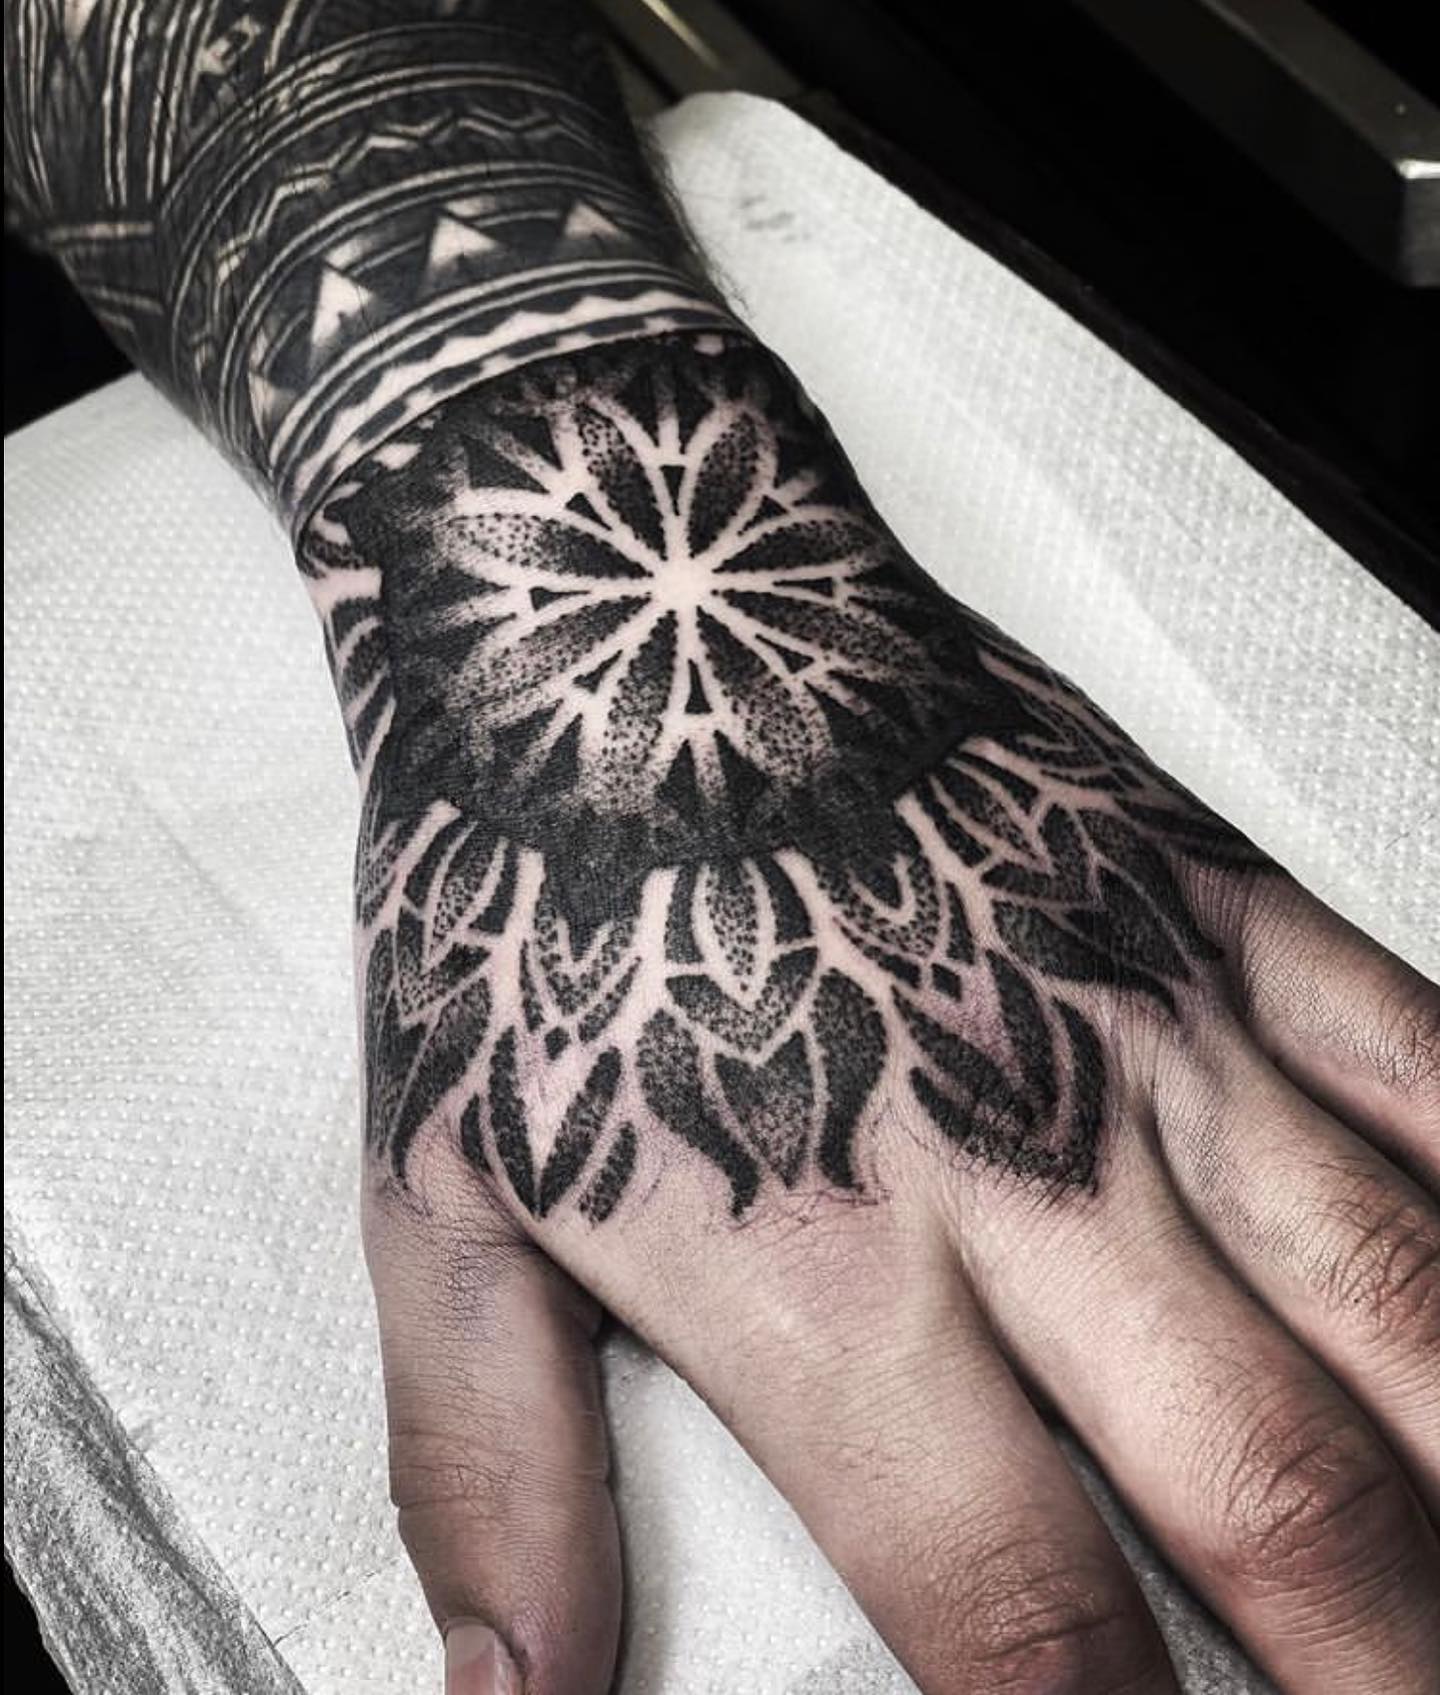 30 Geometric Tattoo Designs For The Creative You  Flower Arrow  More